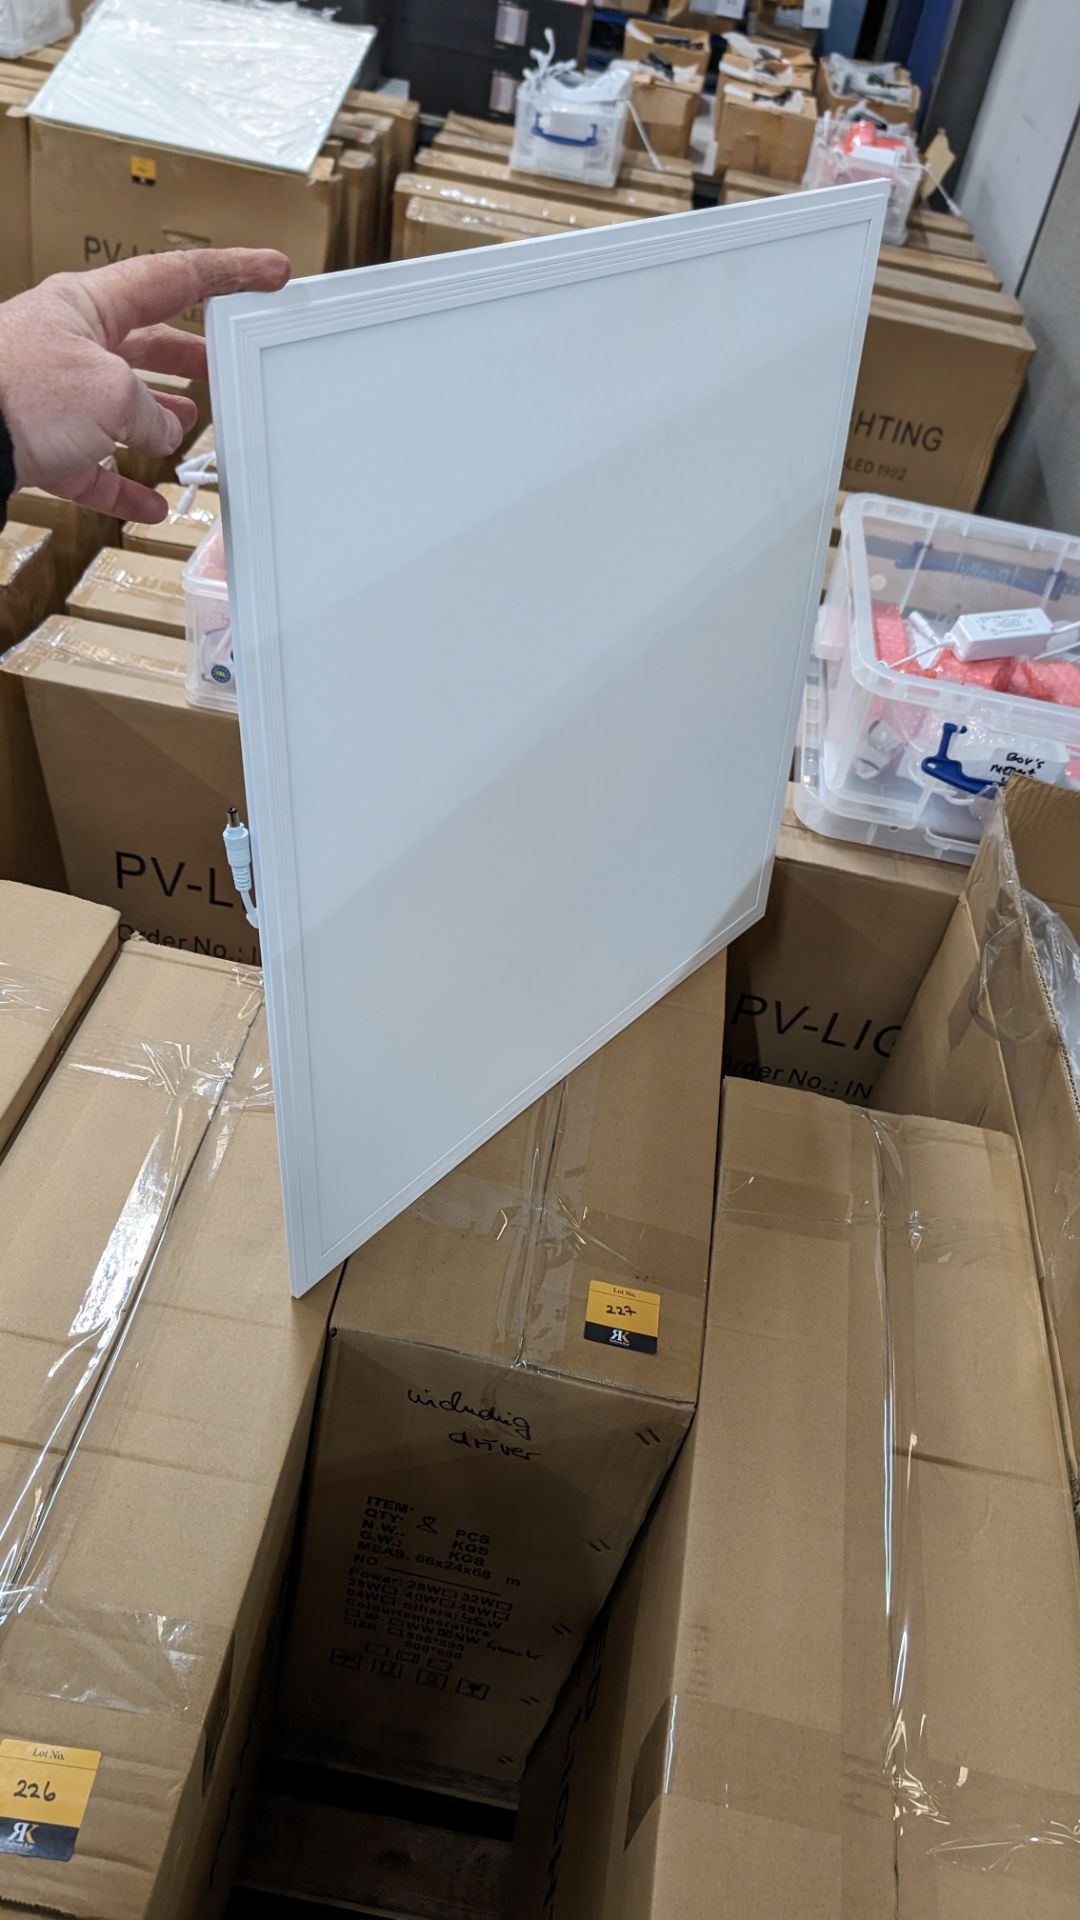 8 off 595mm x 595mm 4000k 45w LED lighting panels, each including driver - 1 carton - Image 2 of 5